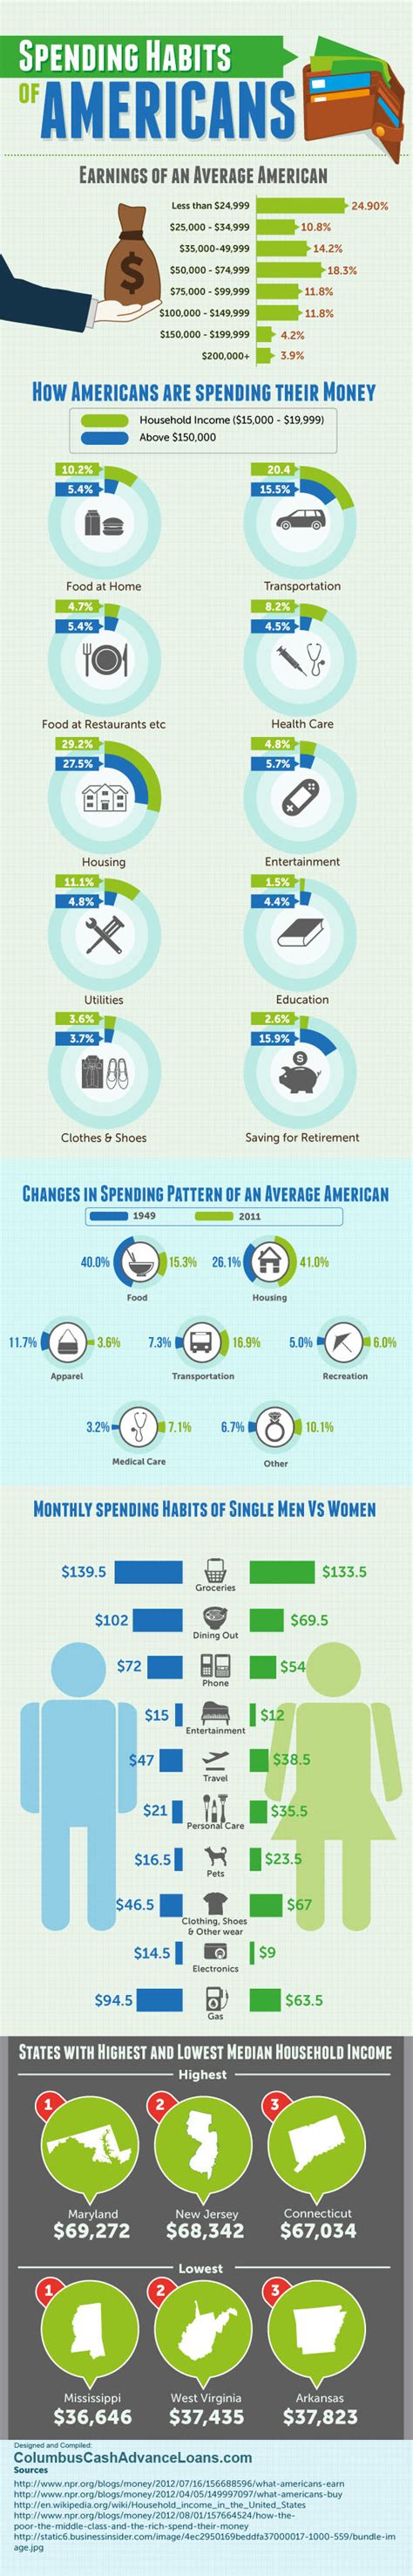 Spending Habits Of Americans [infographic] Only Infographic